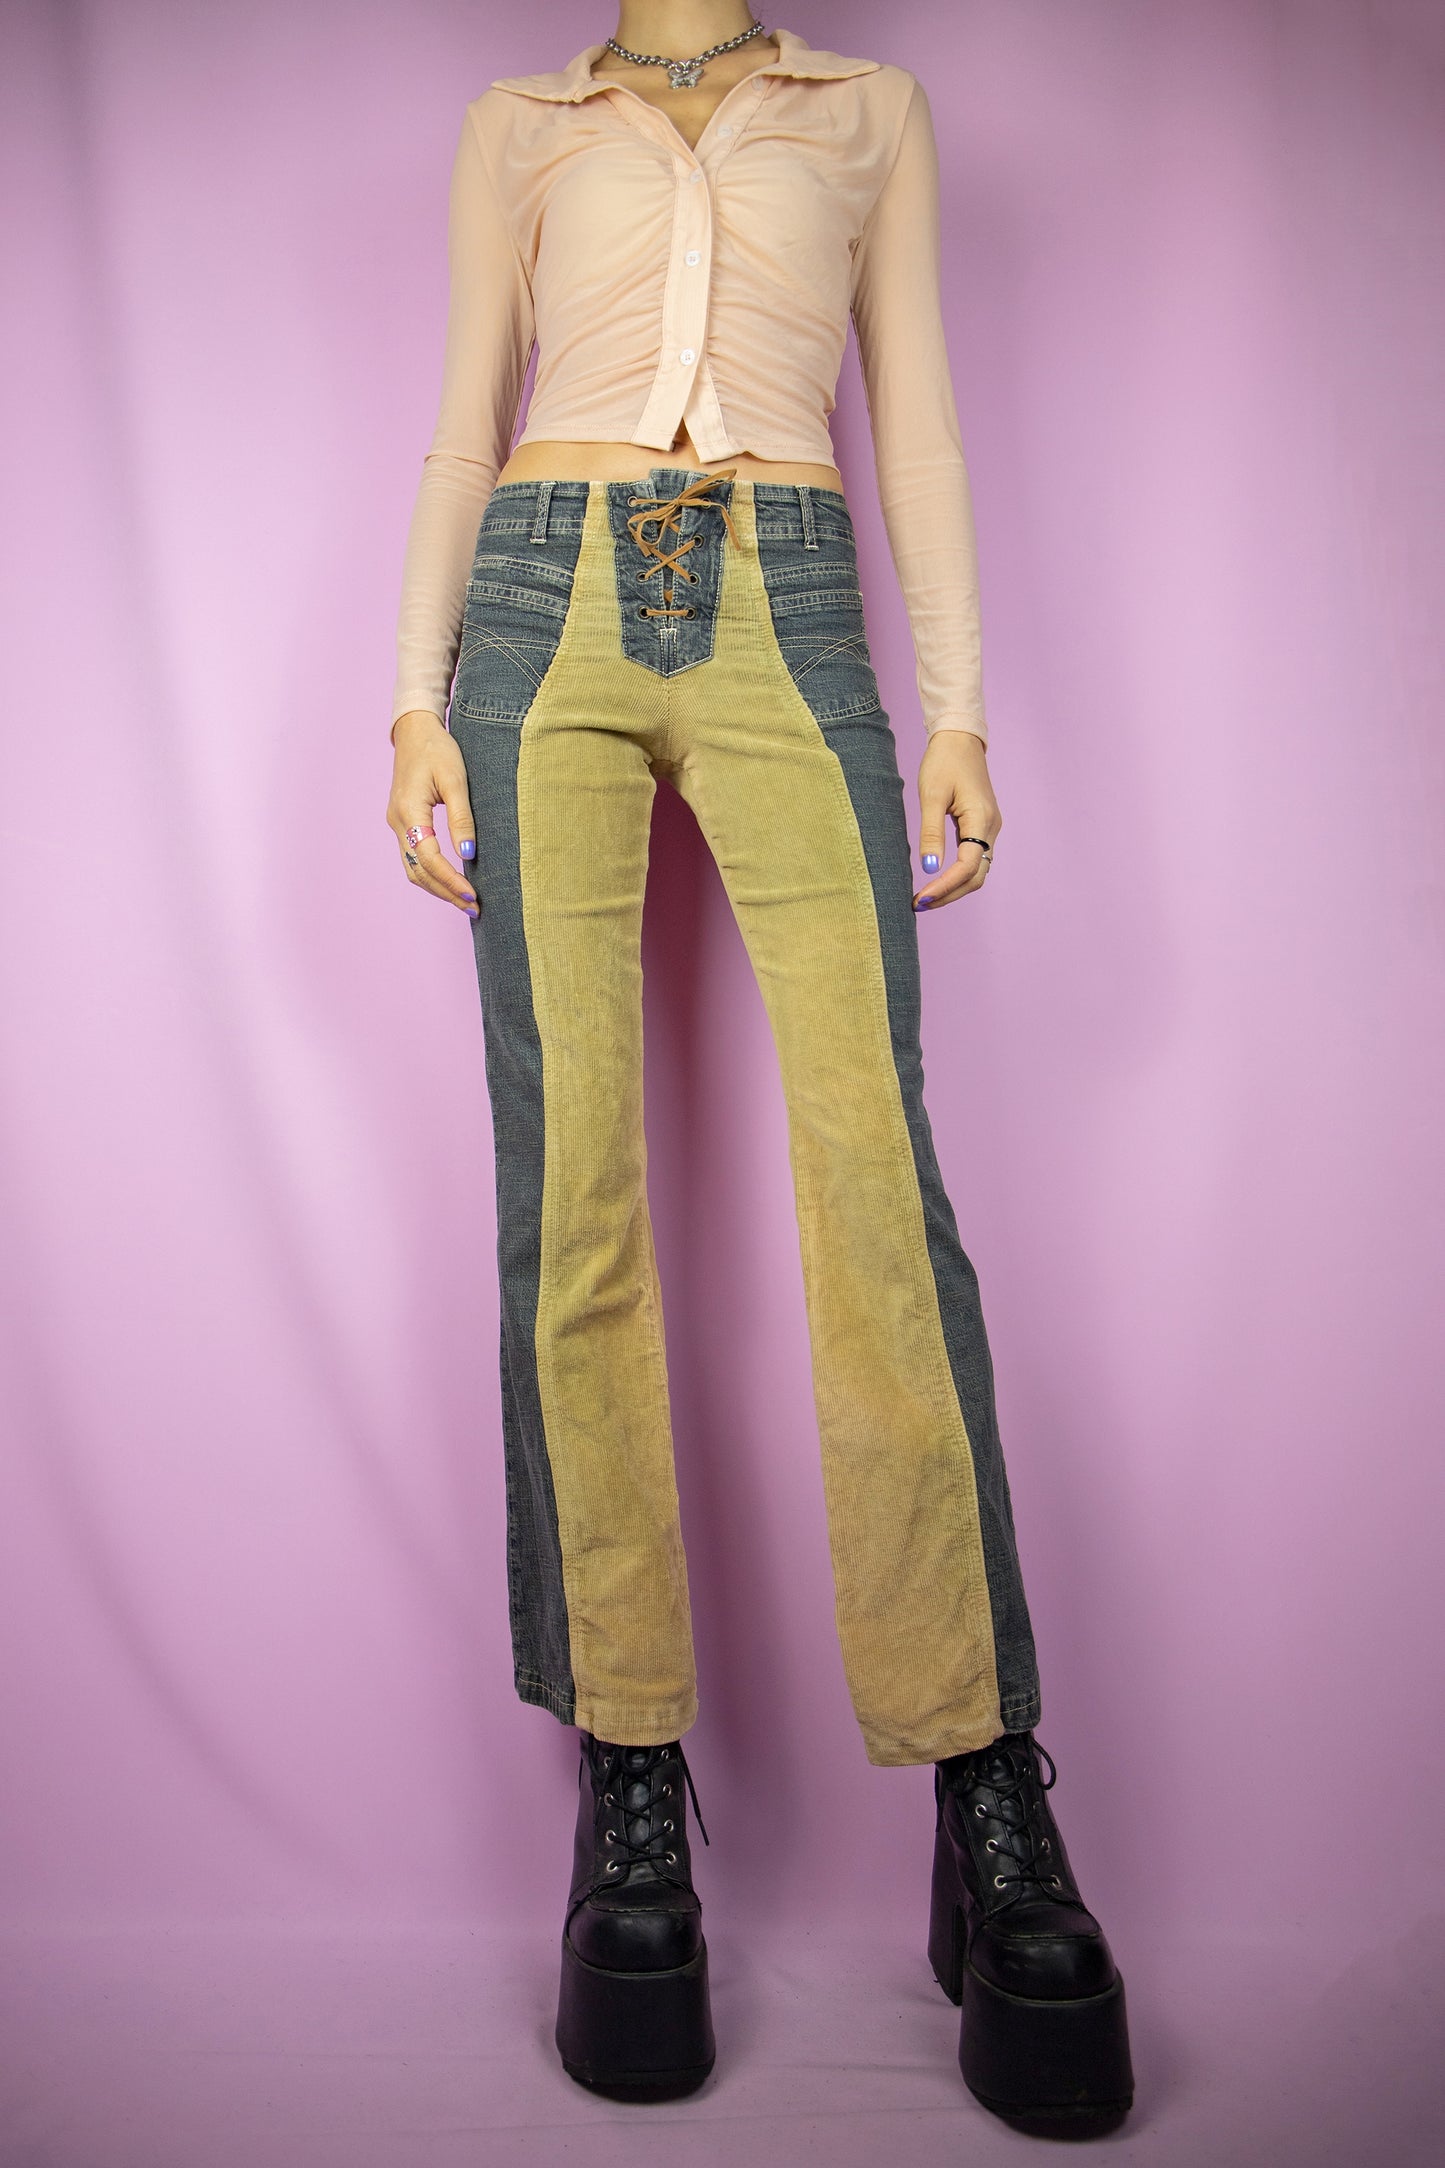 The Vintage Y2K Lace-Up Flare Jeans are mid-rise, featuring a unique design with half-denim and half-beige corduroy. These stretchy flared pants come with pockets and a tie-front detail, representing the iconic cyber millennium denim style from the 2000s.